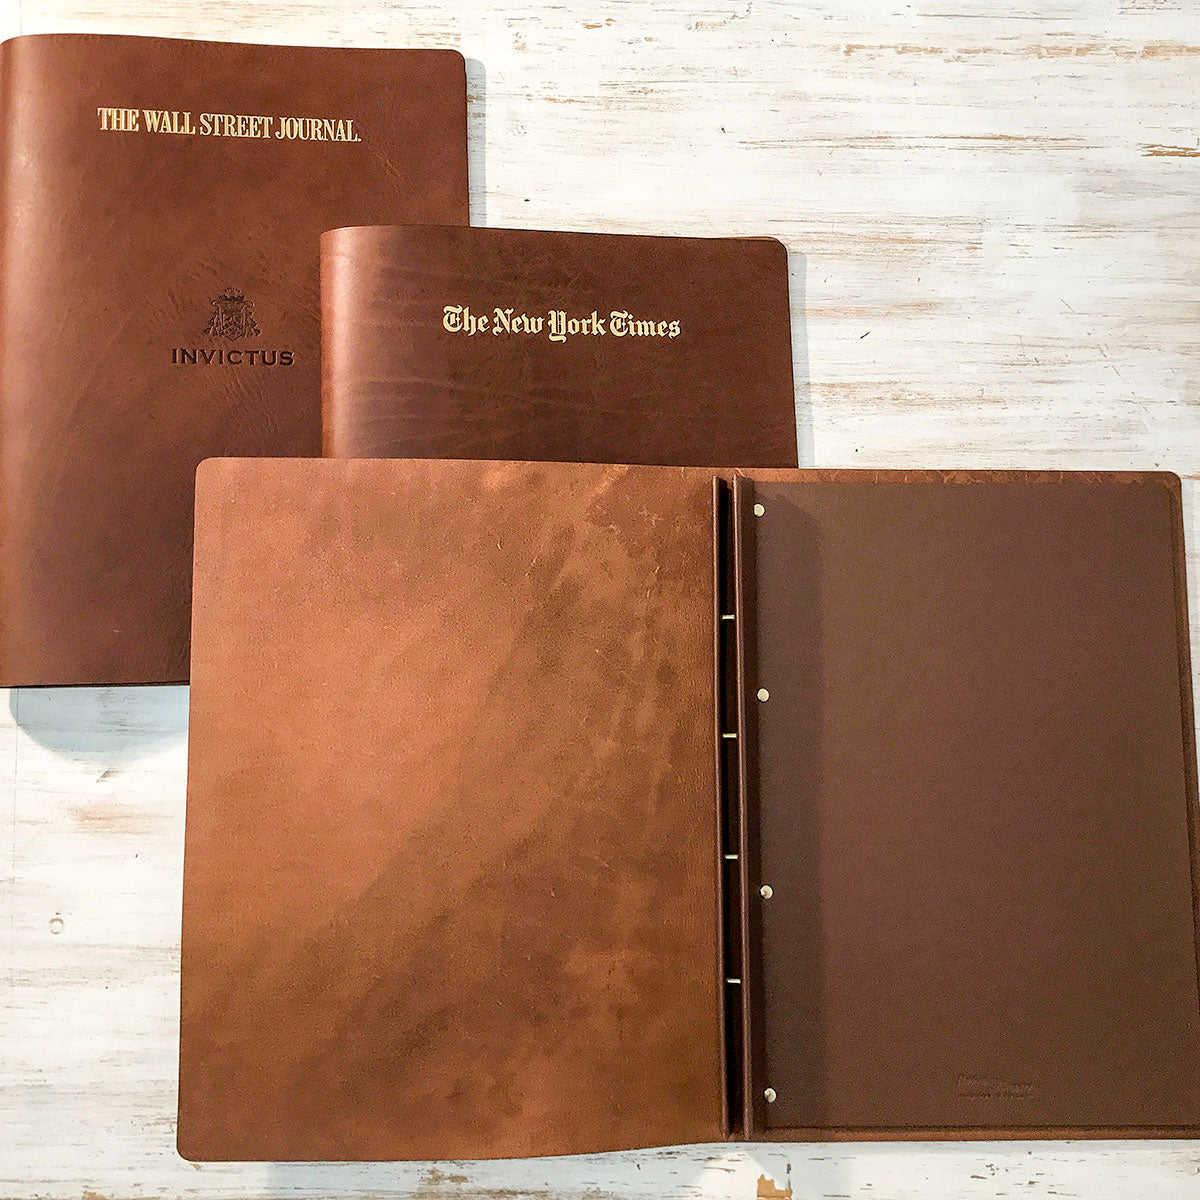 Leather binders for print out of newspapers